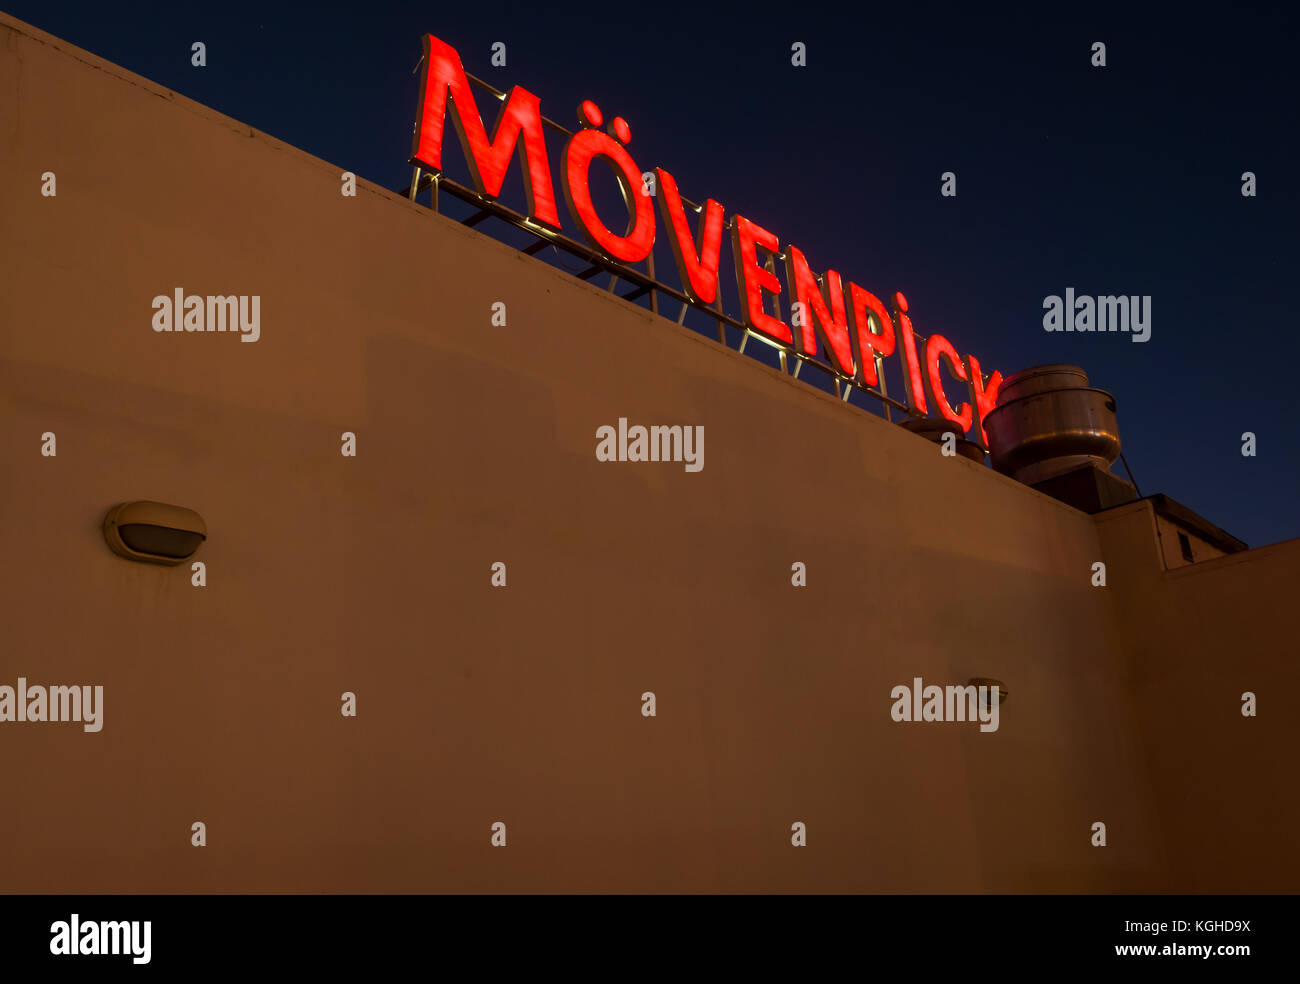 Close up of red lit up neon light at night, Movenpick hotel roof, Wadi Musa, Petra, Jordan, Middle East Stock Photo